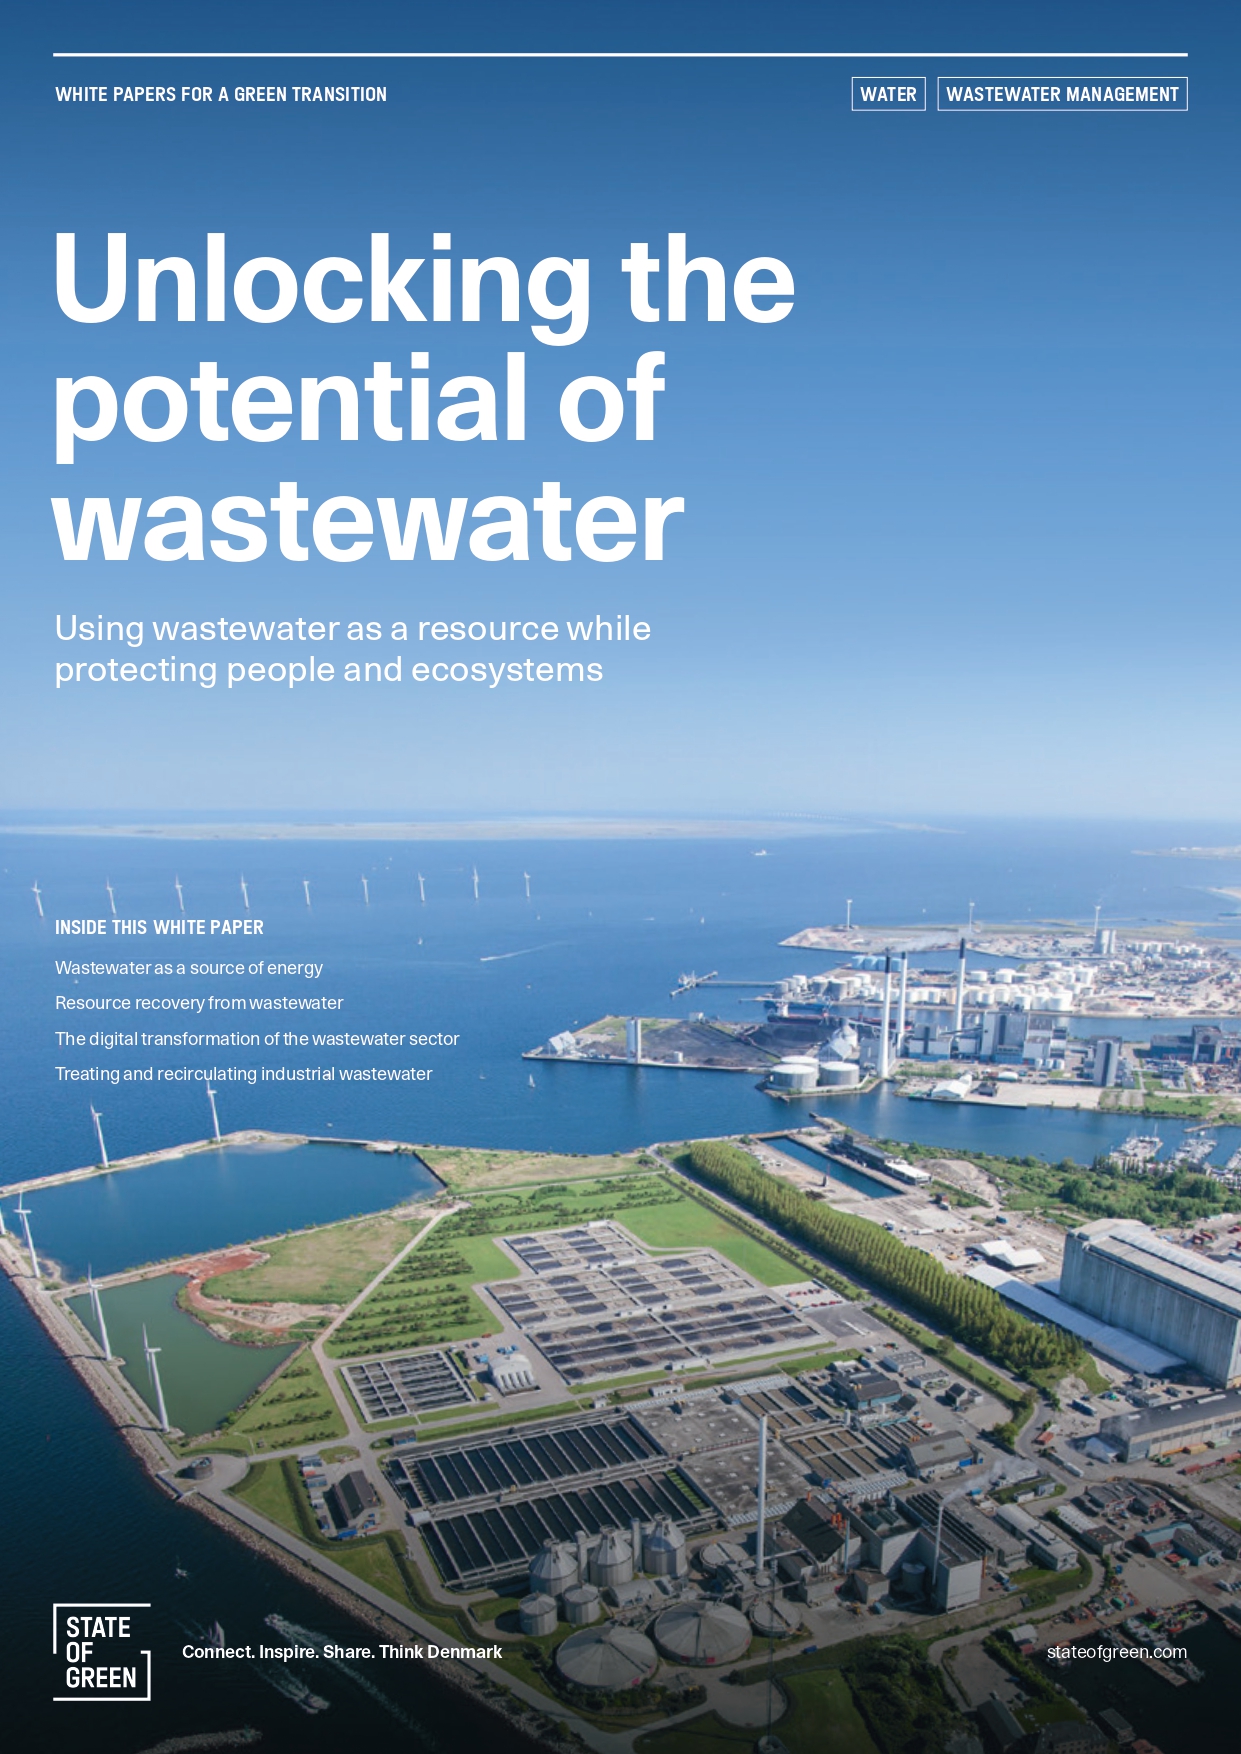 Unlocking the potential of wastewater